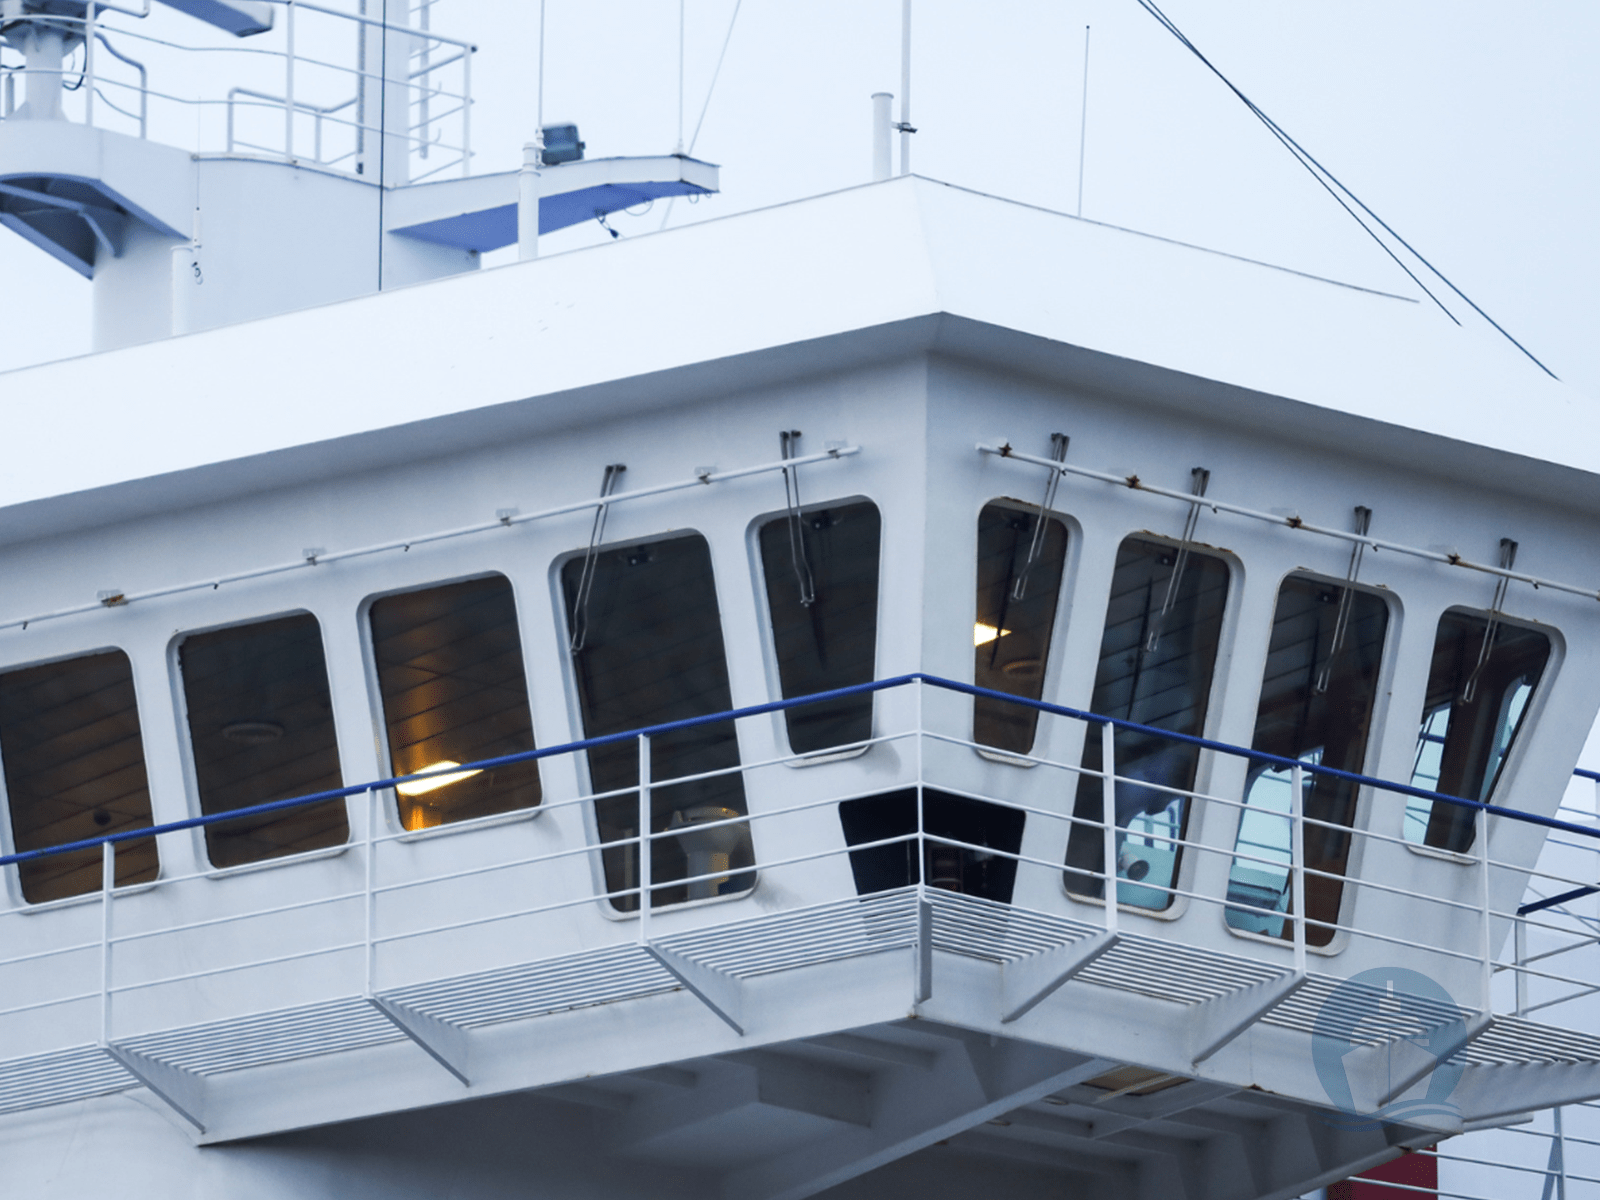 Solarglide Pantograph window wipers onboard commercial Vessel